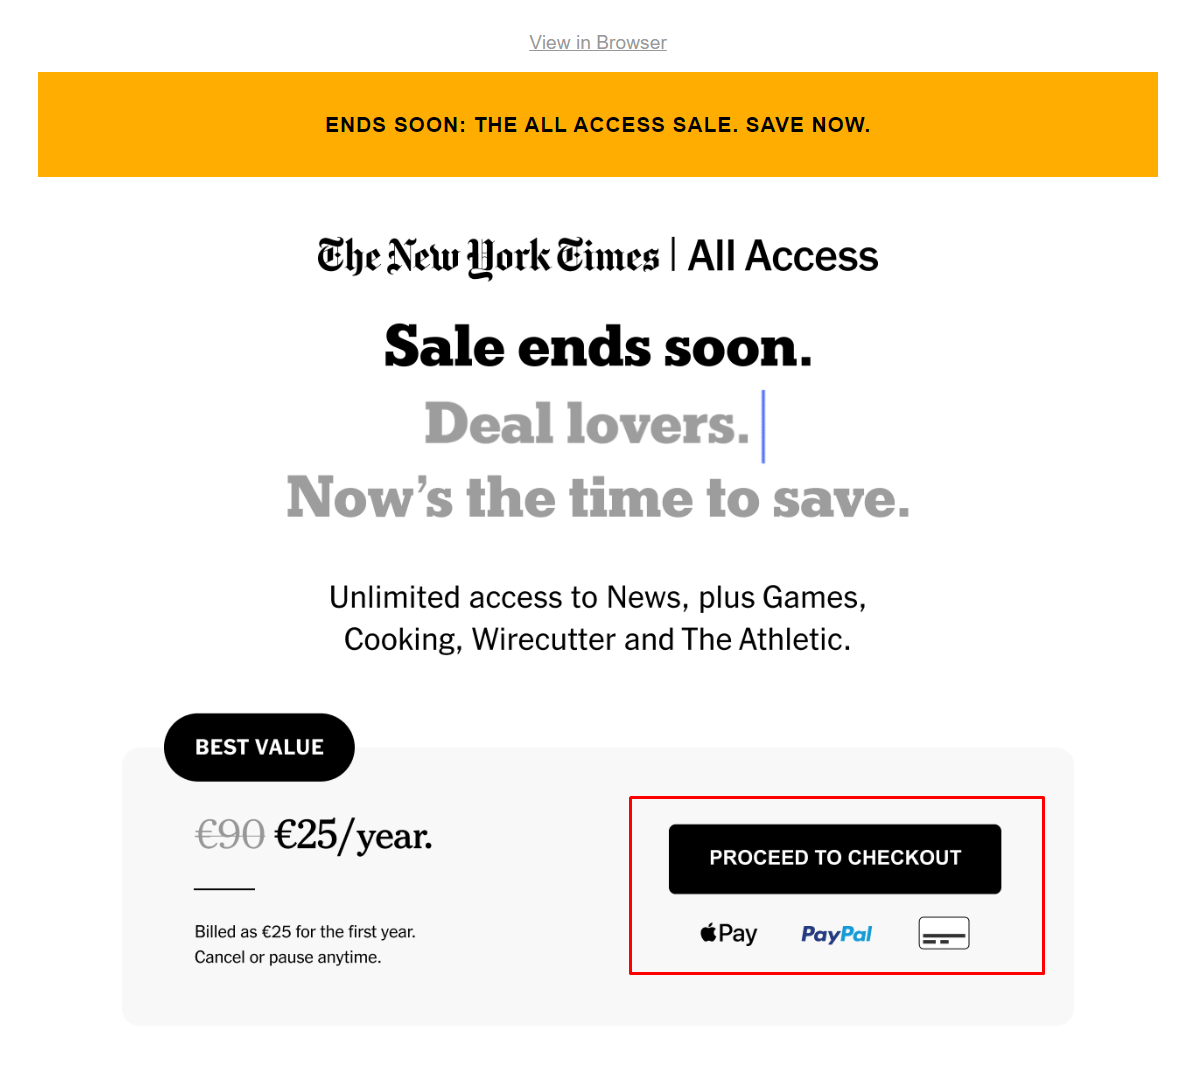 the new york times sale reminder cta